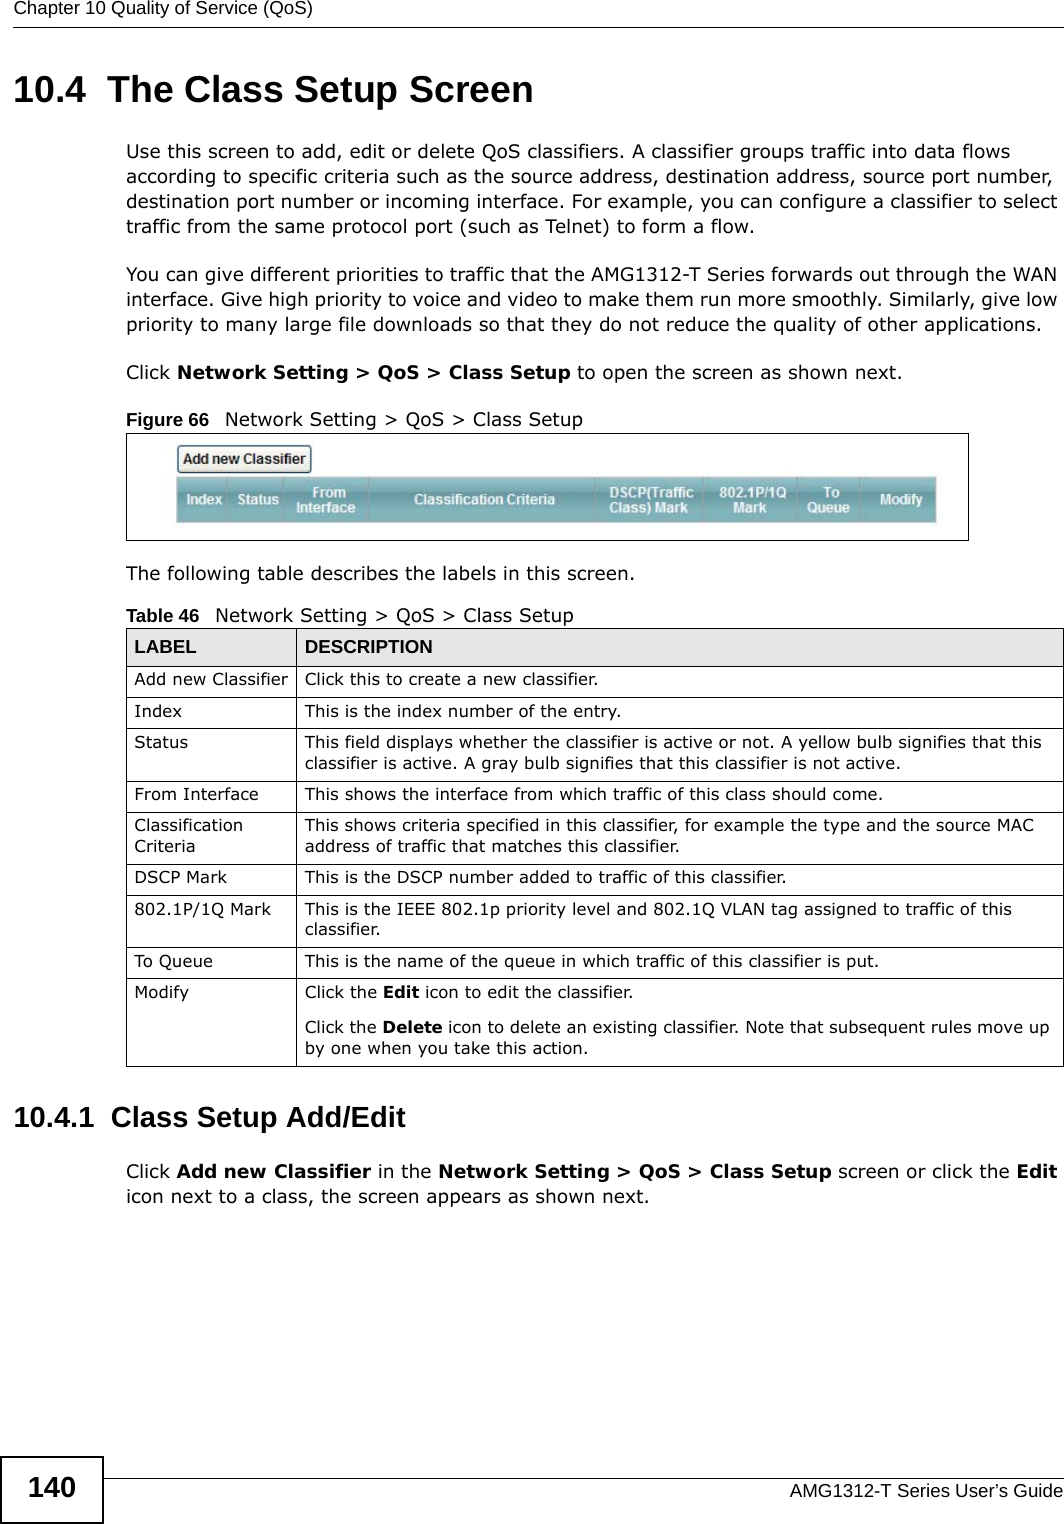 Chapter 10 Quality of Service (QoS)AMG1312-T Series User’s Guide14010.4  The Class Setup Screen Use this screen to add, edit or delete QoS classifiers. A classifier groups traffic into data flows according to specific criteria such as the source address, destination address, source port number, destination port number or incoming interface. For example, you can configure a classifier to select traffic from the same protocol port (such as Telnet) to form a flow.You can give different priorities to traffic that the AMG1312-T Series forwards out through the WAN interface. Give high priority to voice and video to make them run more smoothly. Similarly, give low priority to many large file downloads so that they do not reduce the quality of other applications. Click Network Setting &gt; QoS &gt; Class Setup to open the screen as shown next.Figure 66   Network Setting &gt; QoS &gt; Class SetupThe following table describes the labels in this screen. 10.4.1  Class Setup Add/EditClick Add new Classifier in the Network Setting &gt; QoS &gt; Class Setup screen or click the Edit icon next to a class, the screen appears as shown next.Table 46   Network Setting &gt; QoS &gt; Class SetupLABEL DESCRIPTIONAdd new Classifier Click this to create a new classifier.Index This is the index number of the entry.Status This field displays whether the classifier is active or not. A yellow bulb signifies that this classifier is active. A gray bulb signifies that this classifier is not active.From Interface This shows the interface from which traffic of this class should come.Classification CriteriaThis shows criteria specified in this classifier, for example the type and the source MAC address of traffic that matches this classifier.DSCP Mark This is the DSCP number added to traffic of this classifier.802.1P/1Q Mark This is the IEEE 802.1p priority level and 802.1Q VLAN tag assigned to traffic of this classifier.To Queue This is the name of the queue in which traffic of this classifier is put.Modify Click the Edit icon to edit the classifier.Click the Delete icon to delete an existing classifier. Note that subsequent rules move up by one when you take this action.